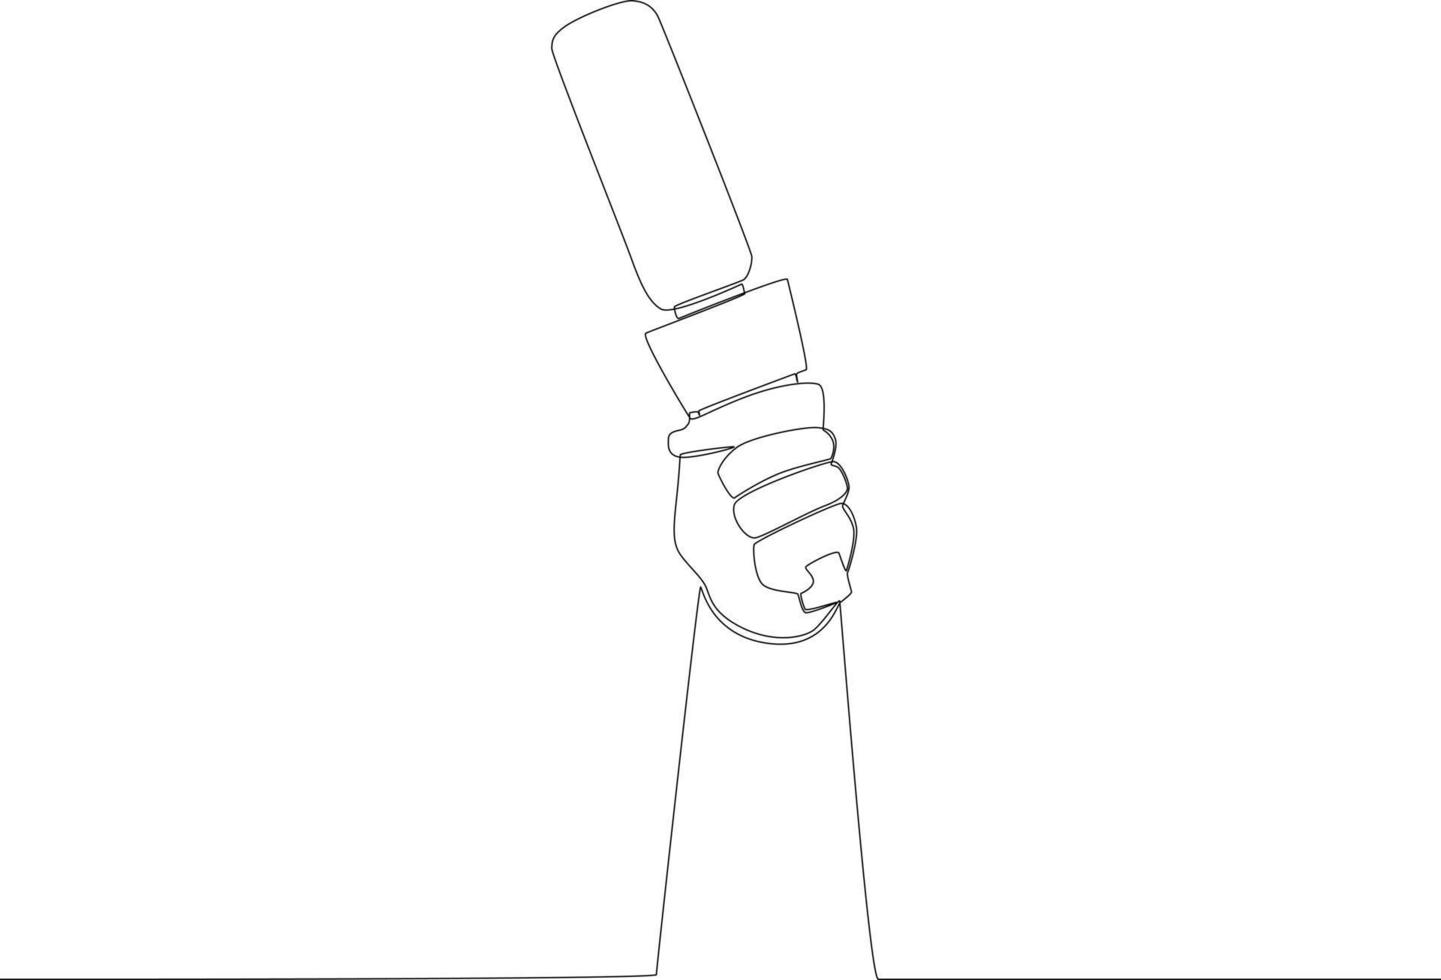 A microphone with an elongated design vector